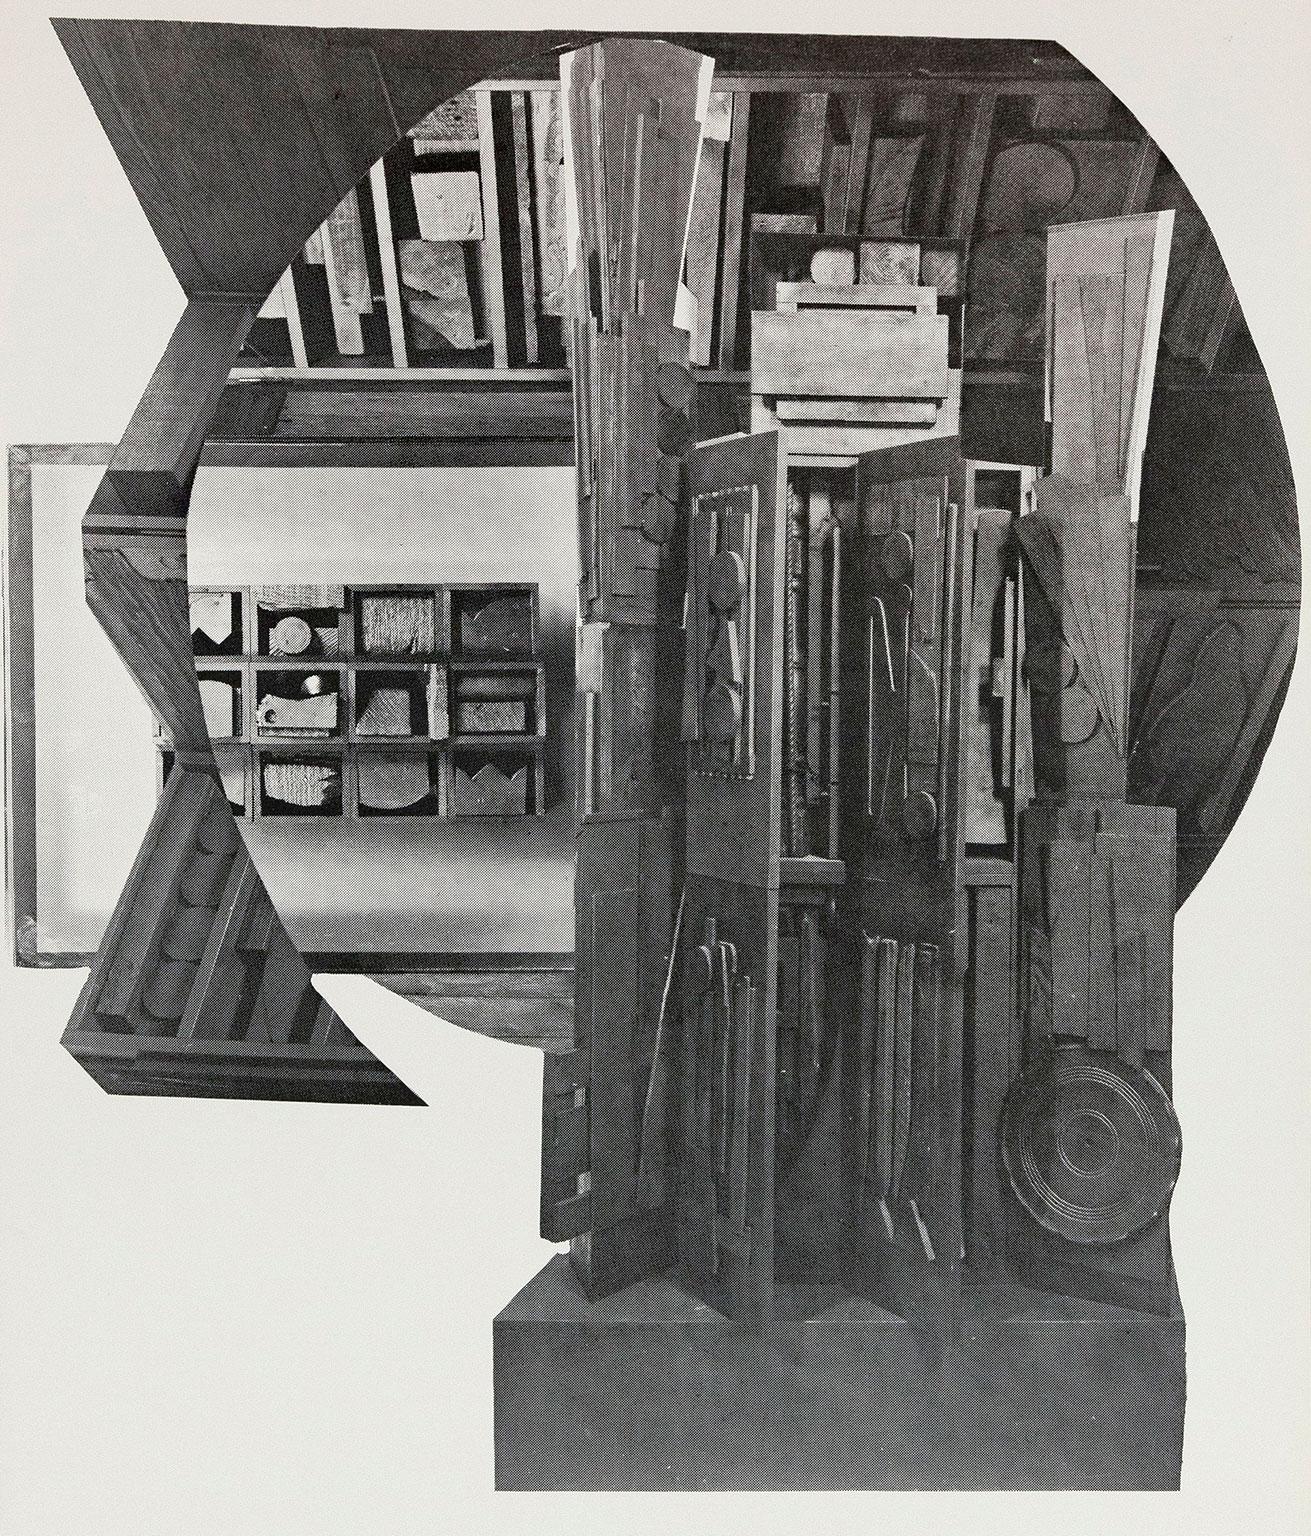 Caviar20 is thrilled to present Louise Nevelson - one of the most revered and unique artists of the 20th century. Though best known for her work as a sculptor, like many of her American contemporaries, Nevelson explored many different branches of